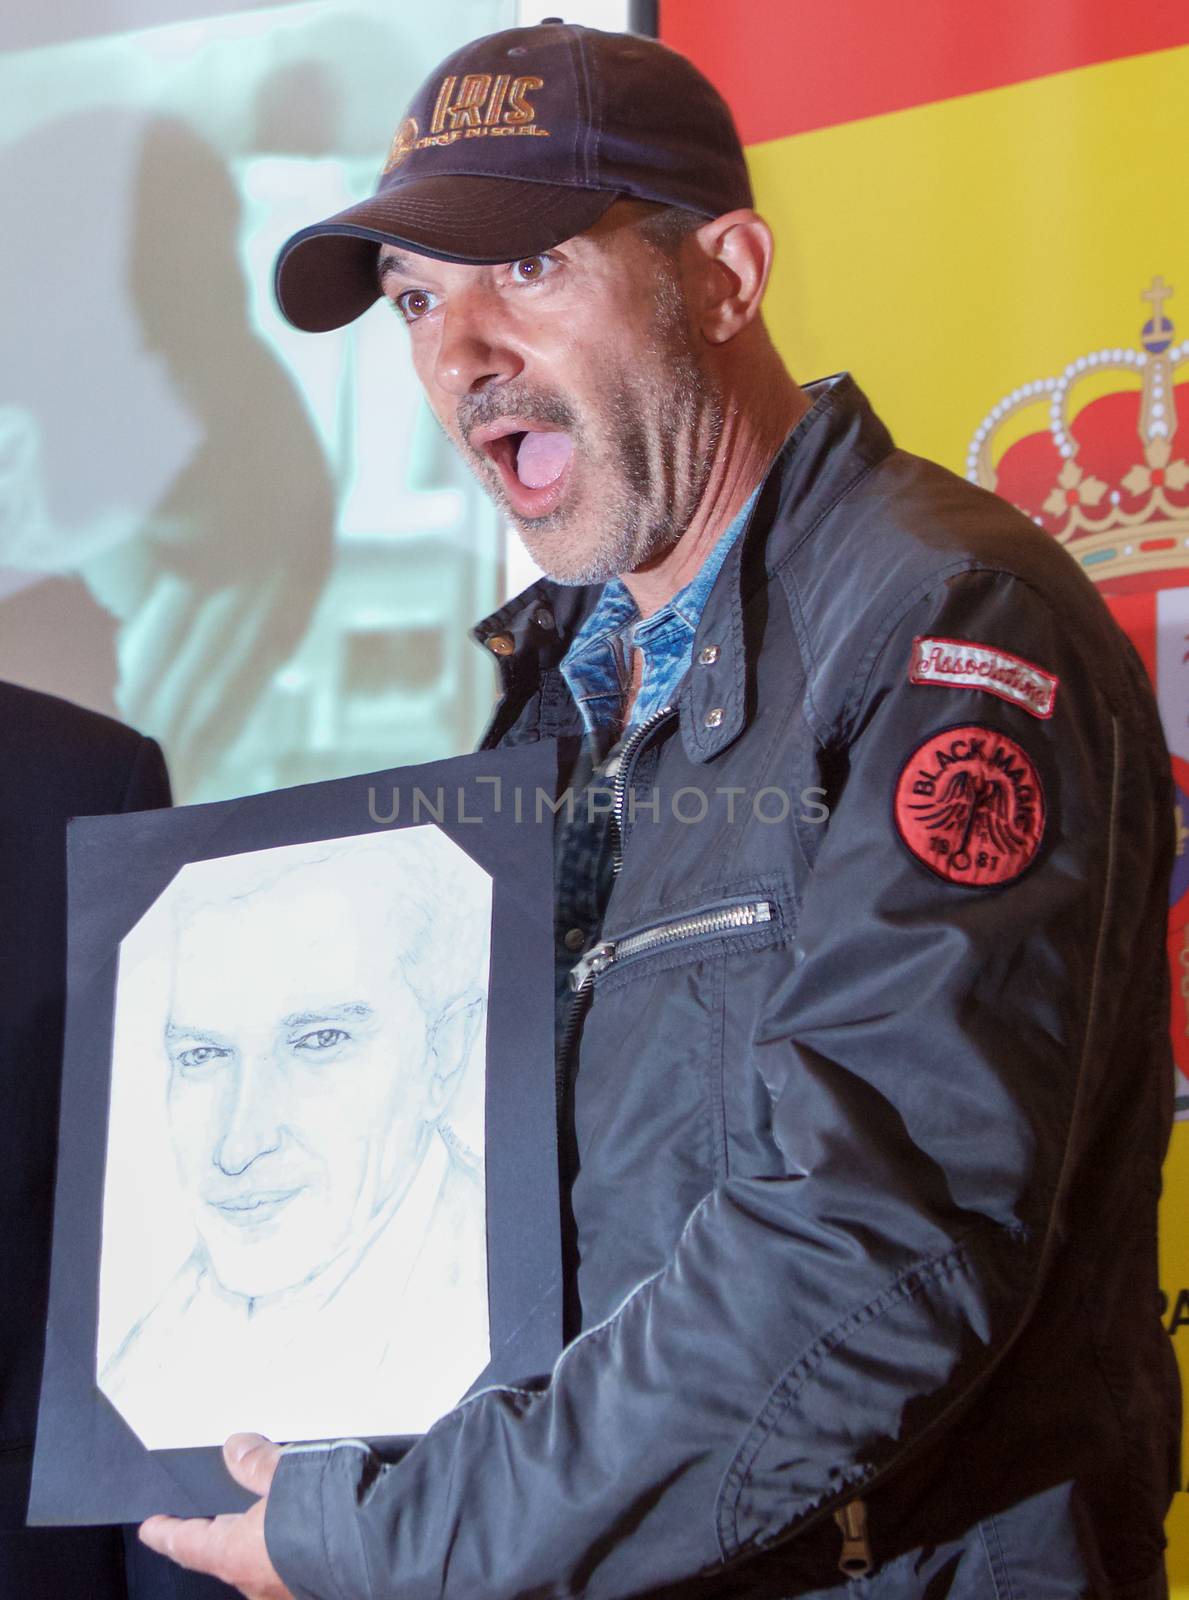 Sofia, Bulgaria - June 11, 2013: Antonio Banderas is reacting when given a drawing from a fan at Mati hall press conference during the 20th Film Festival of the hispanic and hibero hispanic movies in Sofia, Bulgaria.